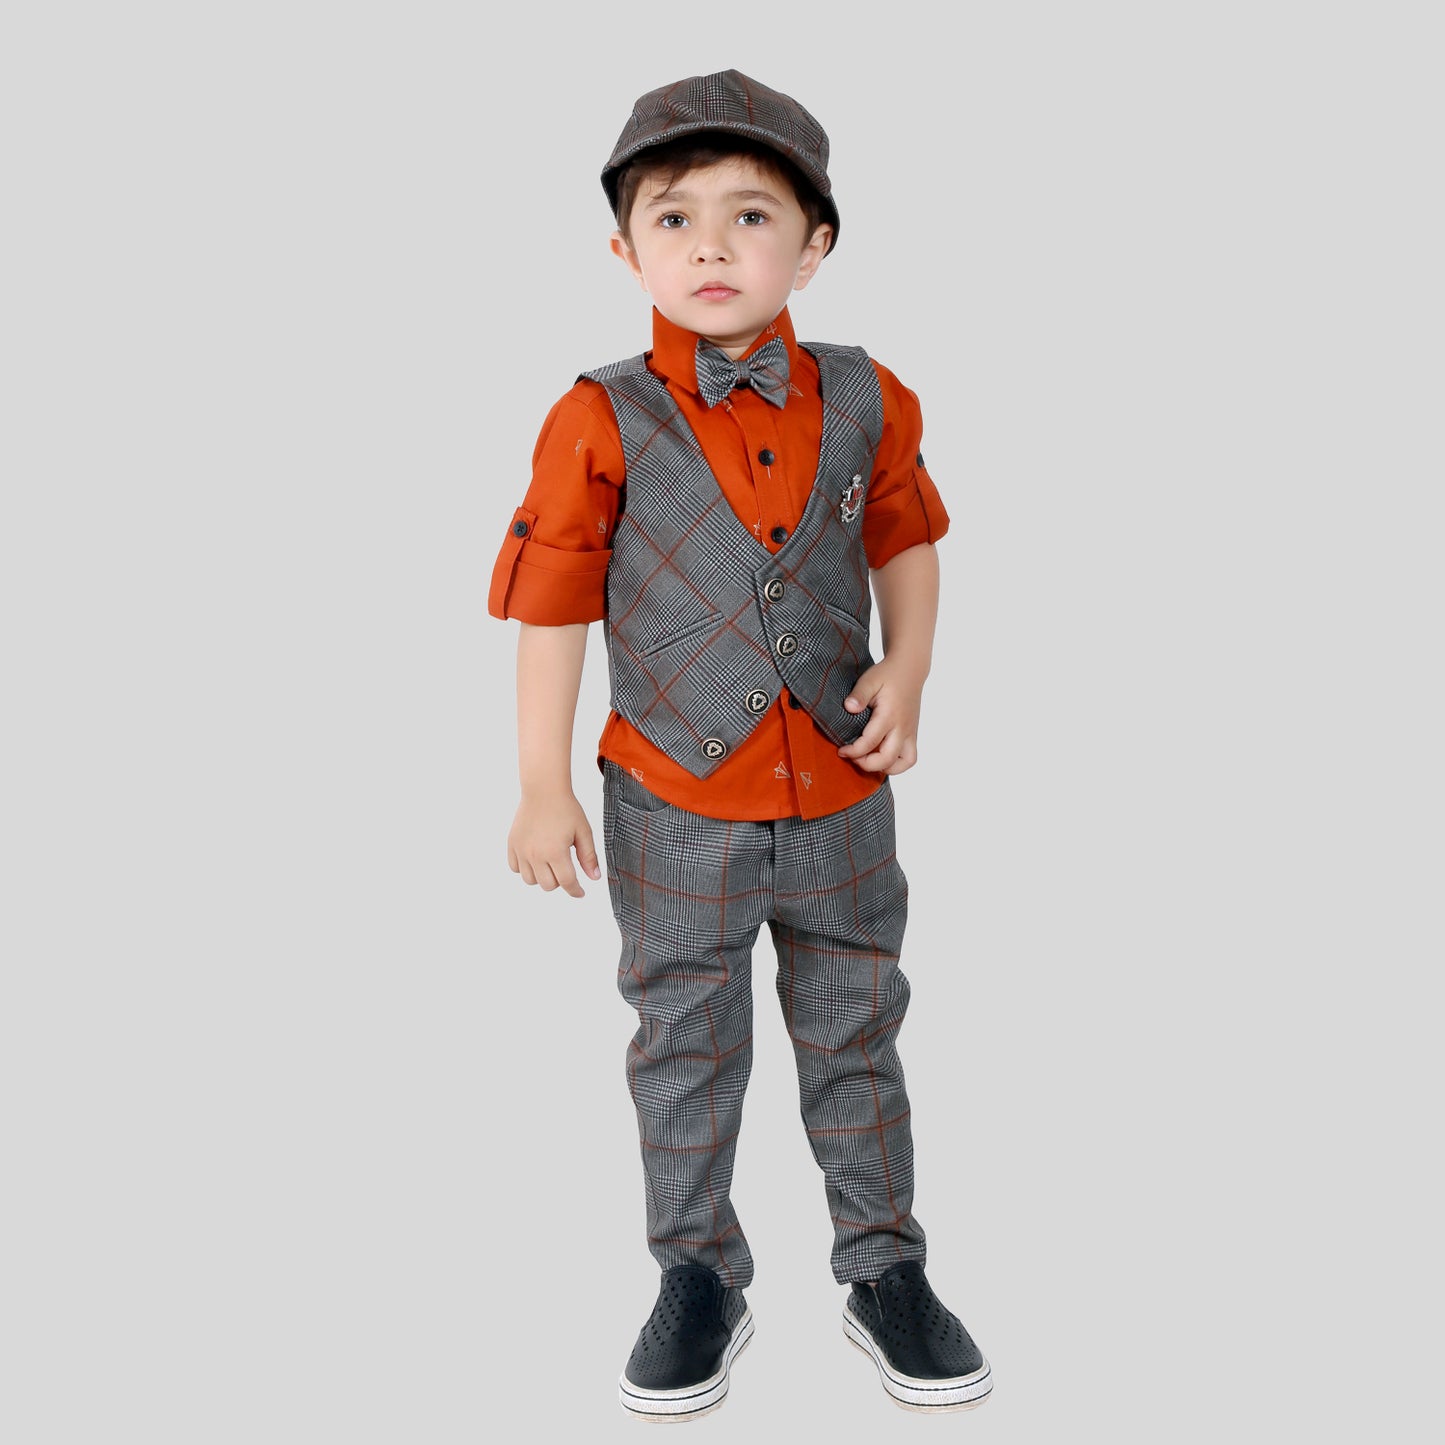 BAD BOYS ELEGANT AND COMFORTABLE OUTFIT WITH SHIRT, WAISTCOAT AND PANTS